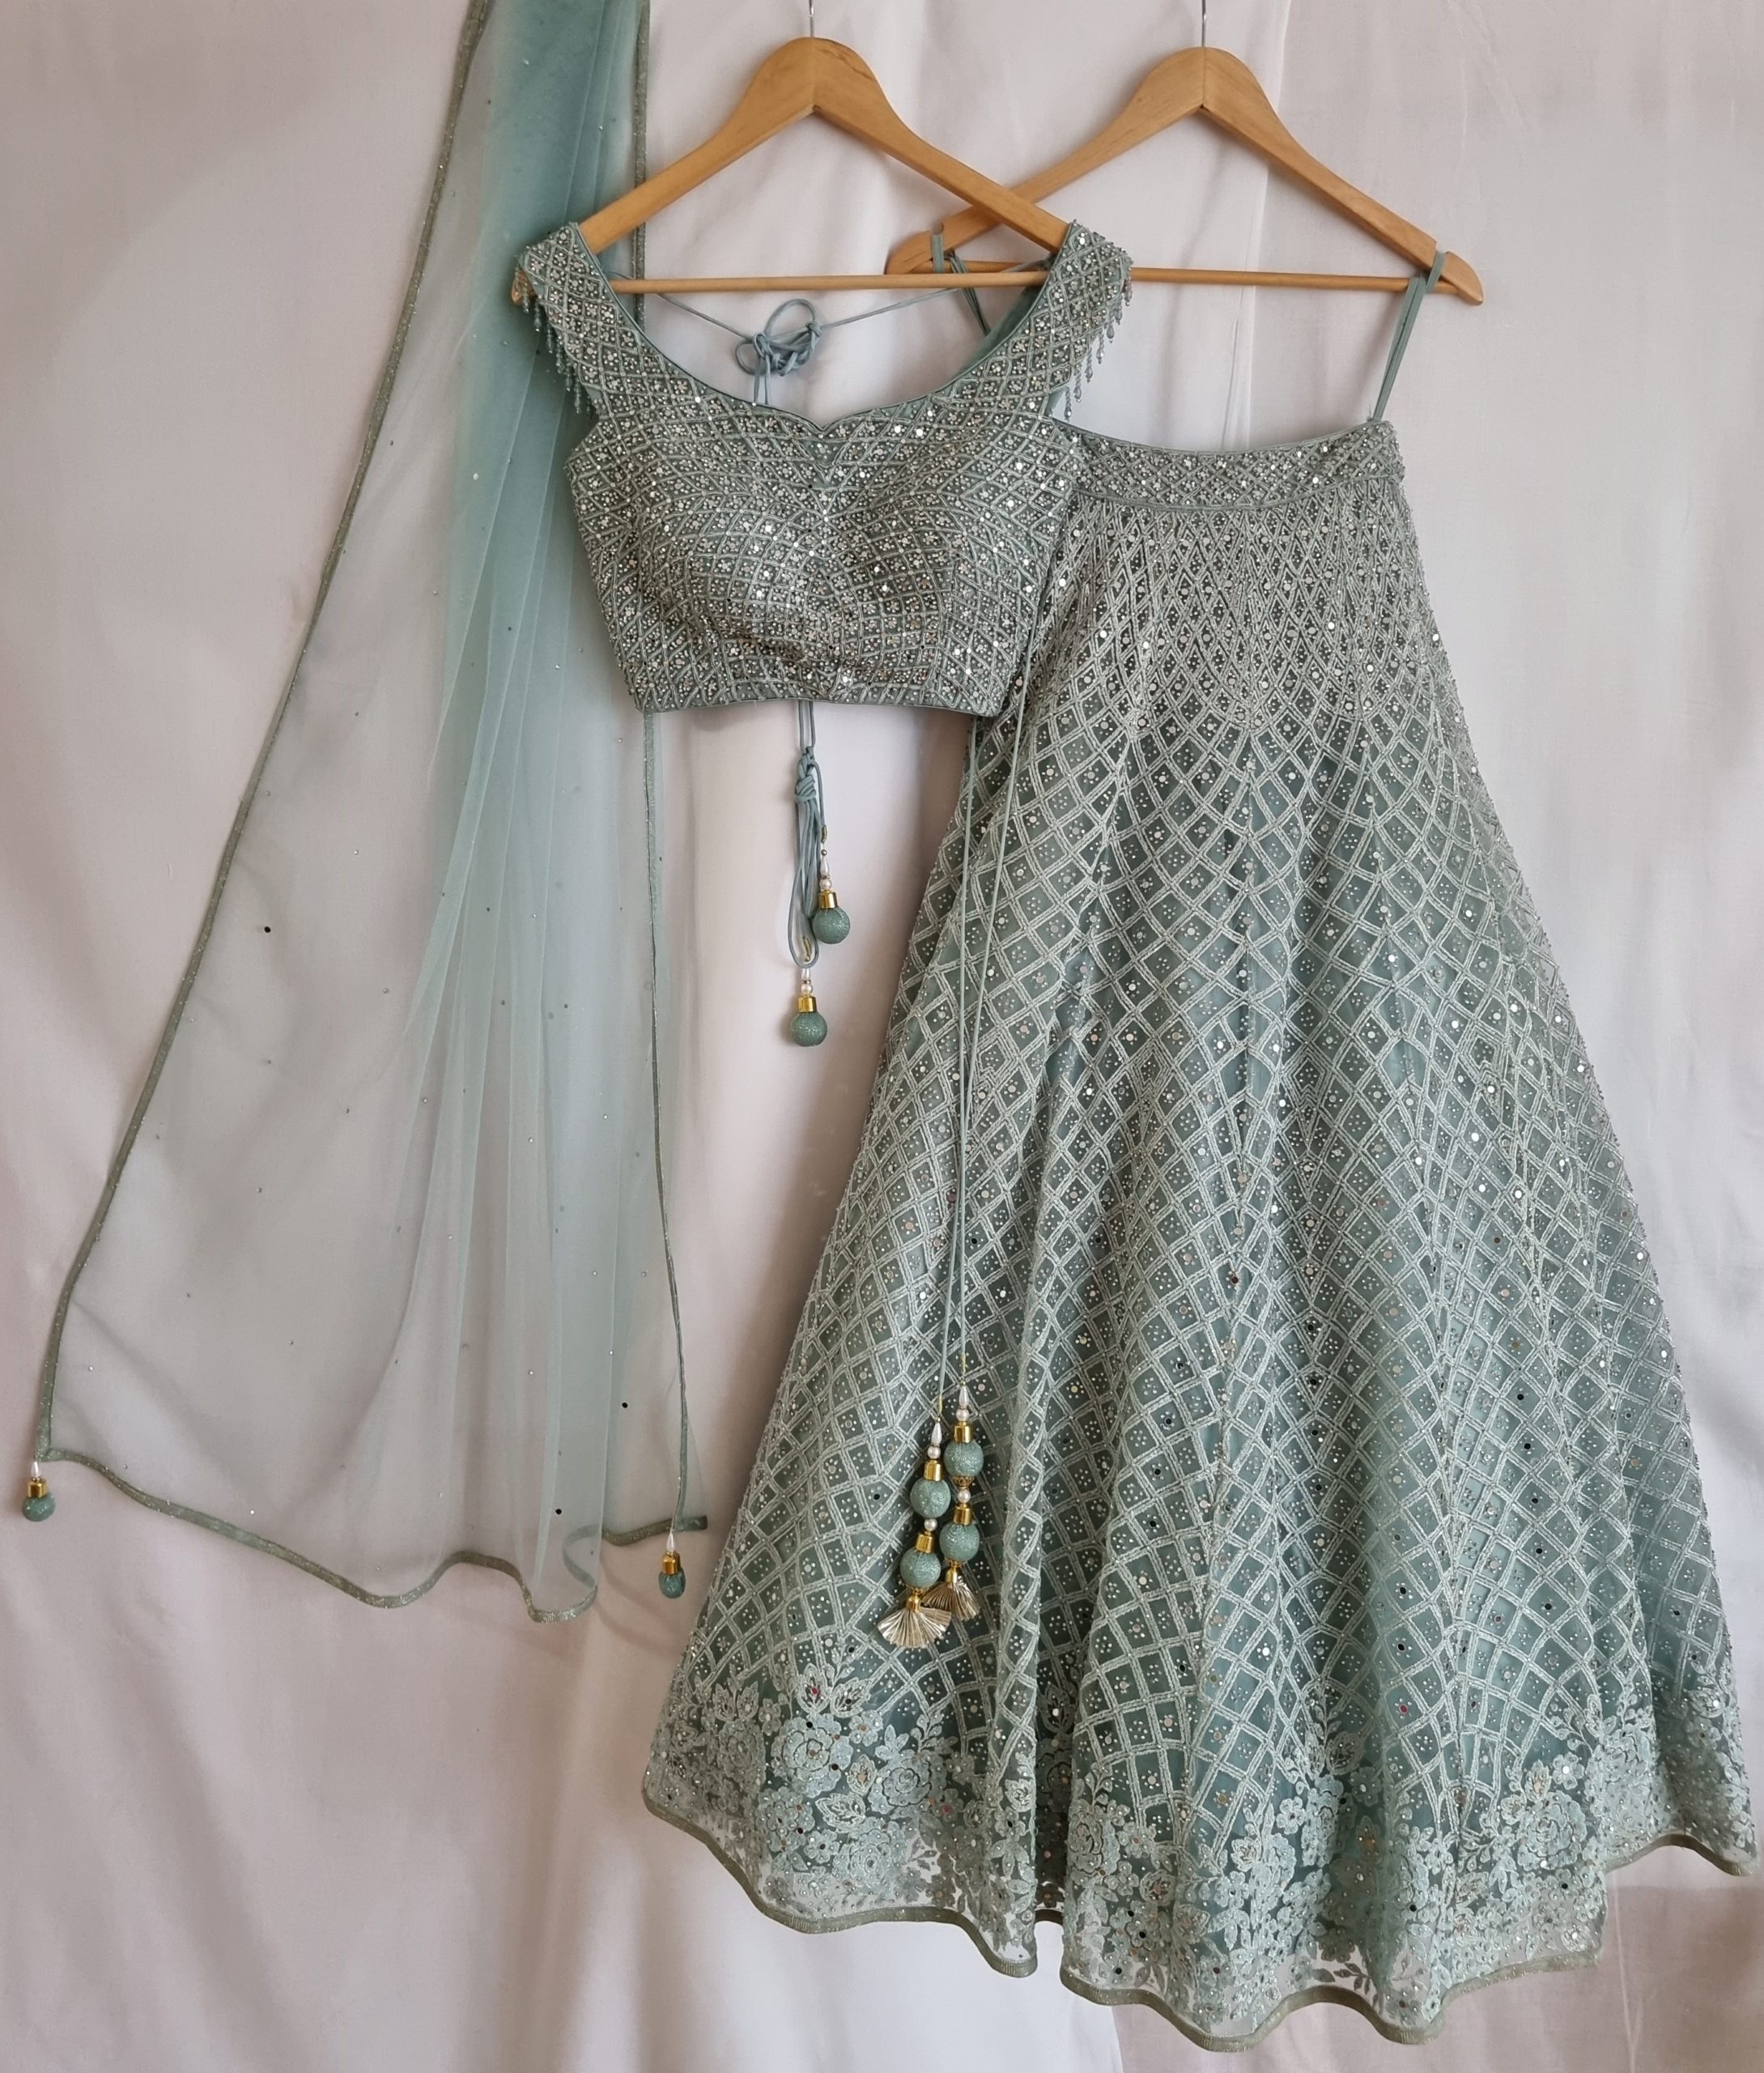 https://desithrift.com/storage/photos/663/Full-outfit-scaled.jpg